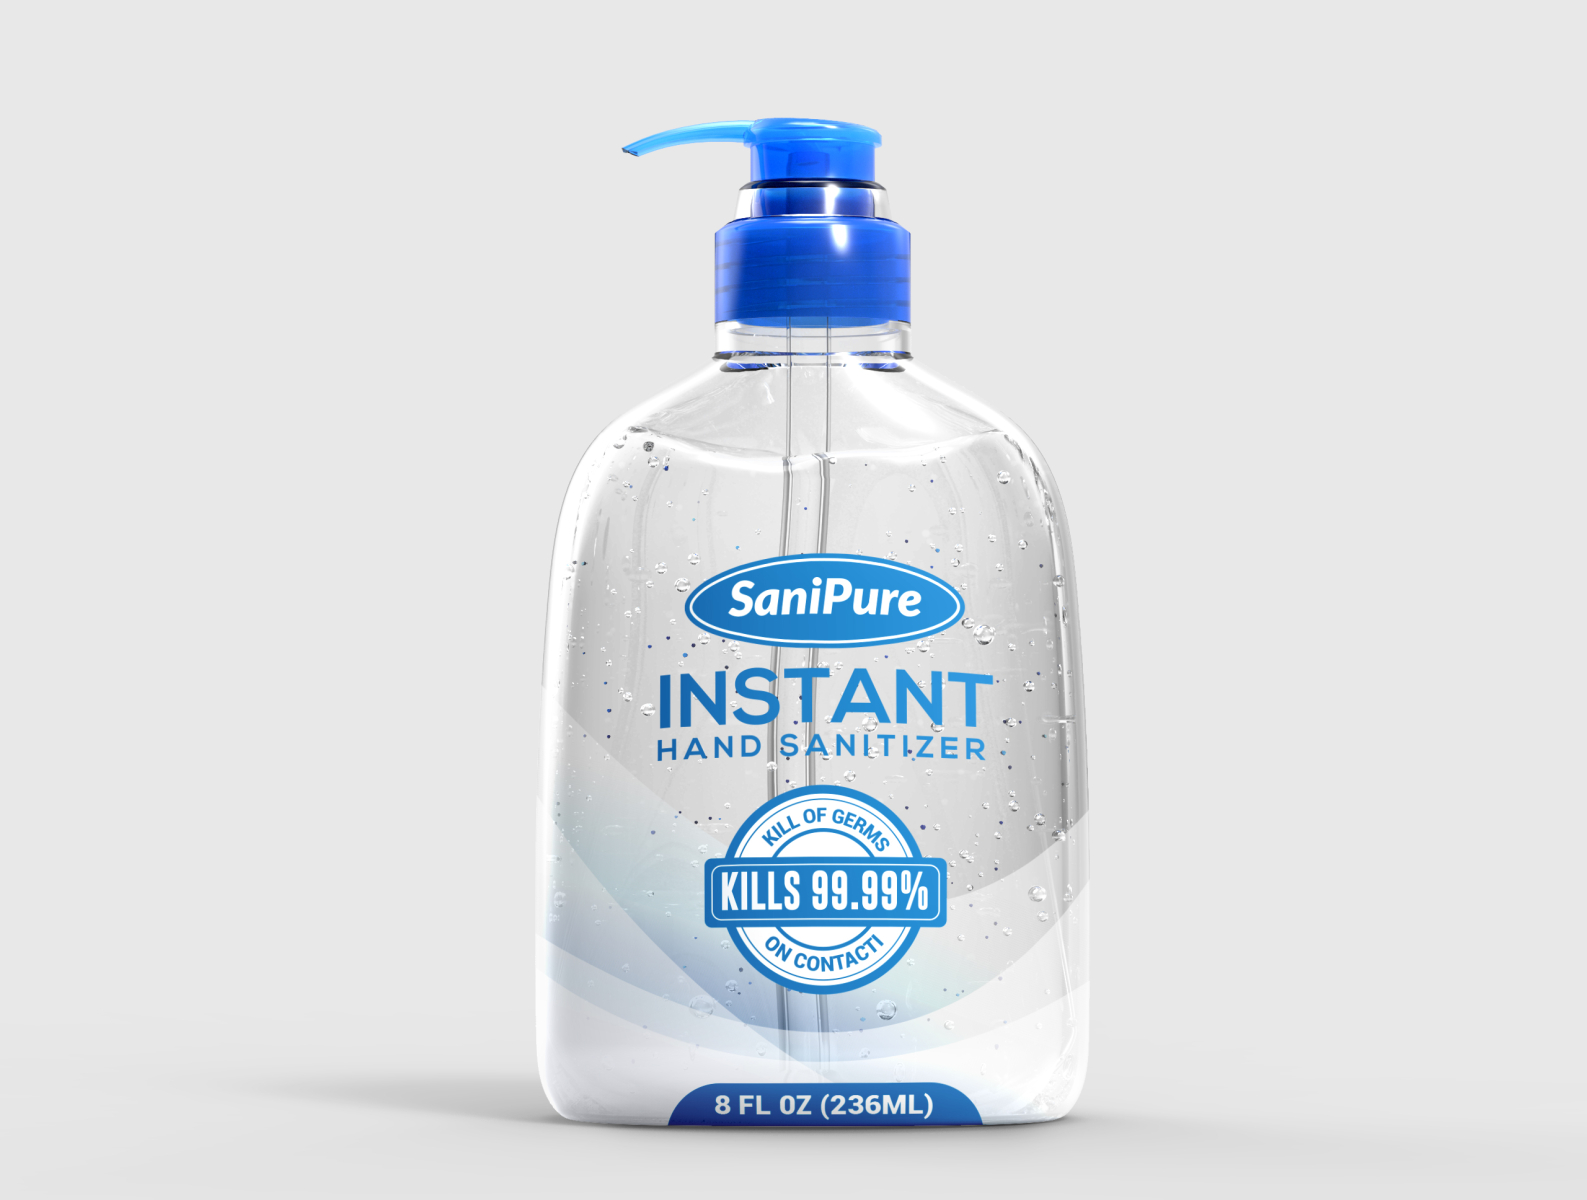 simple-hand-sanitizer-label-design-by-shawondesigns-on-dribbble